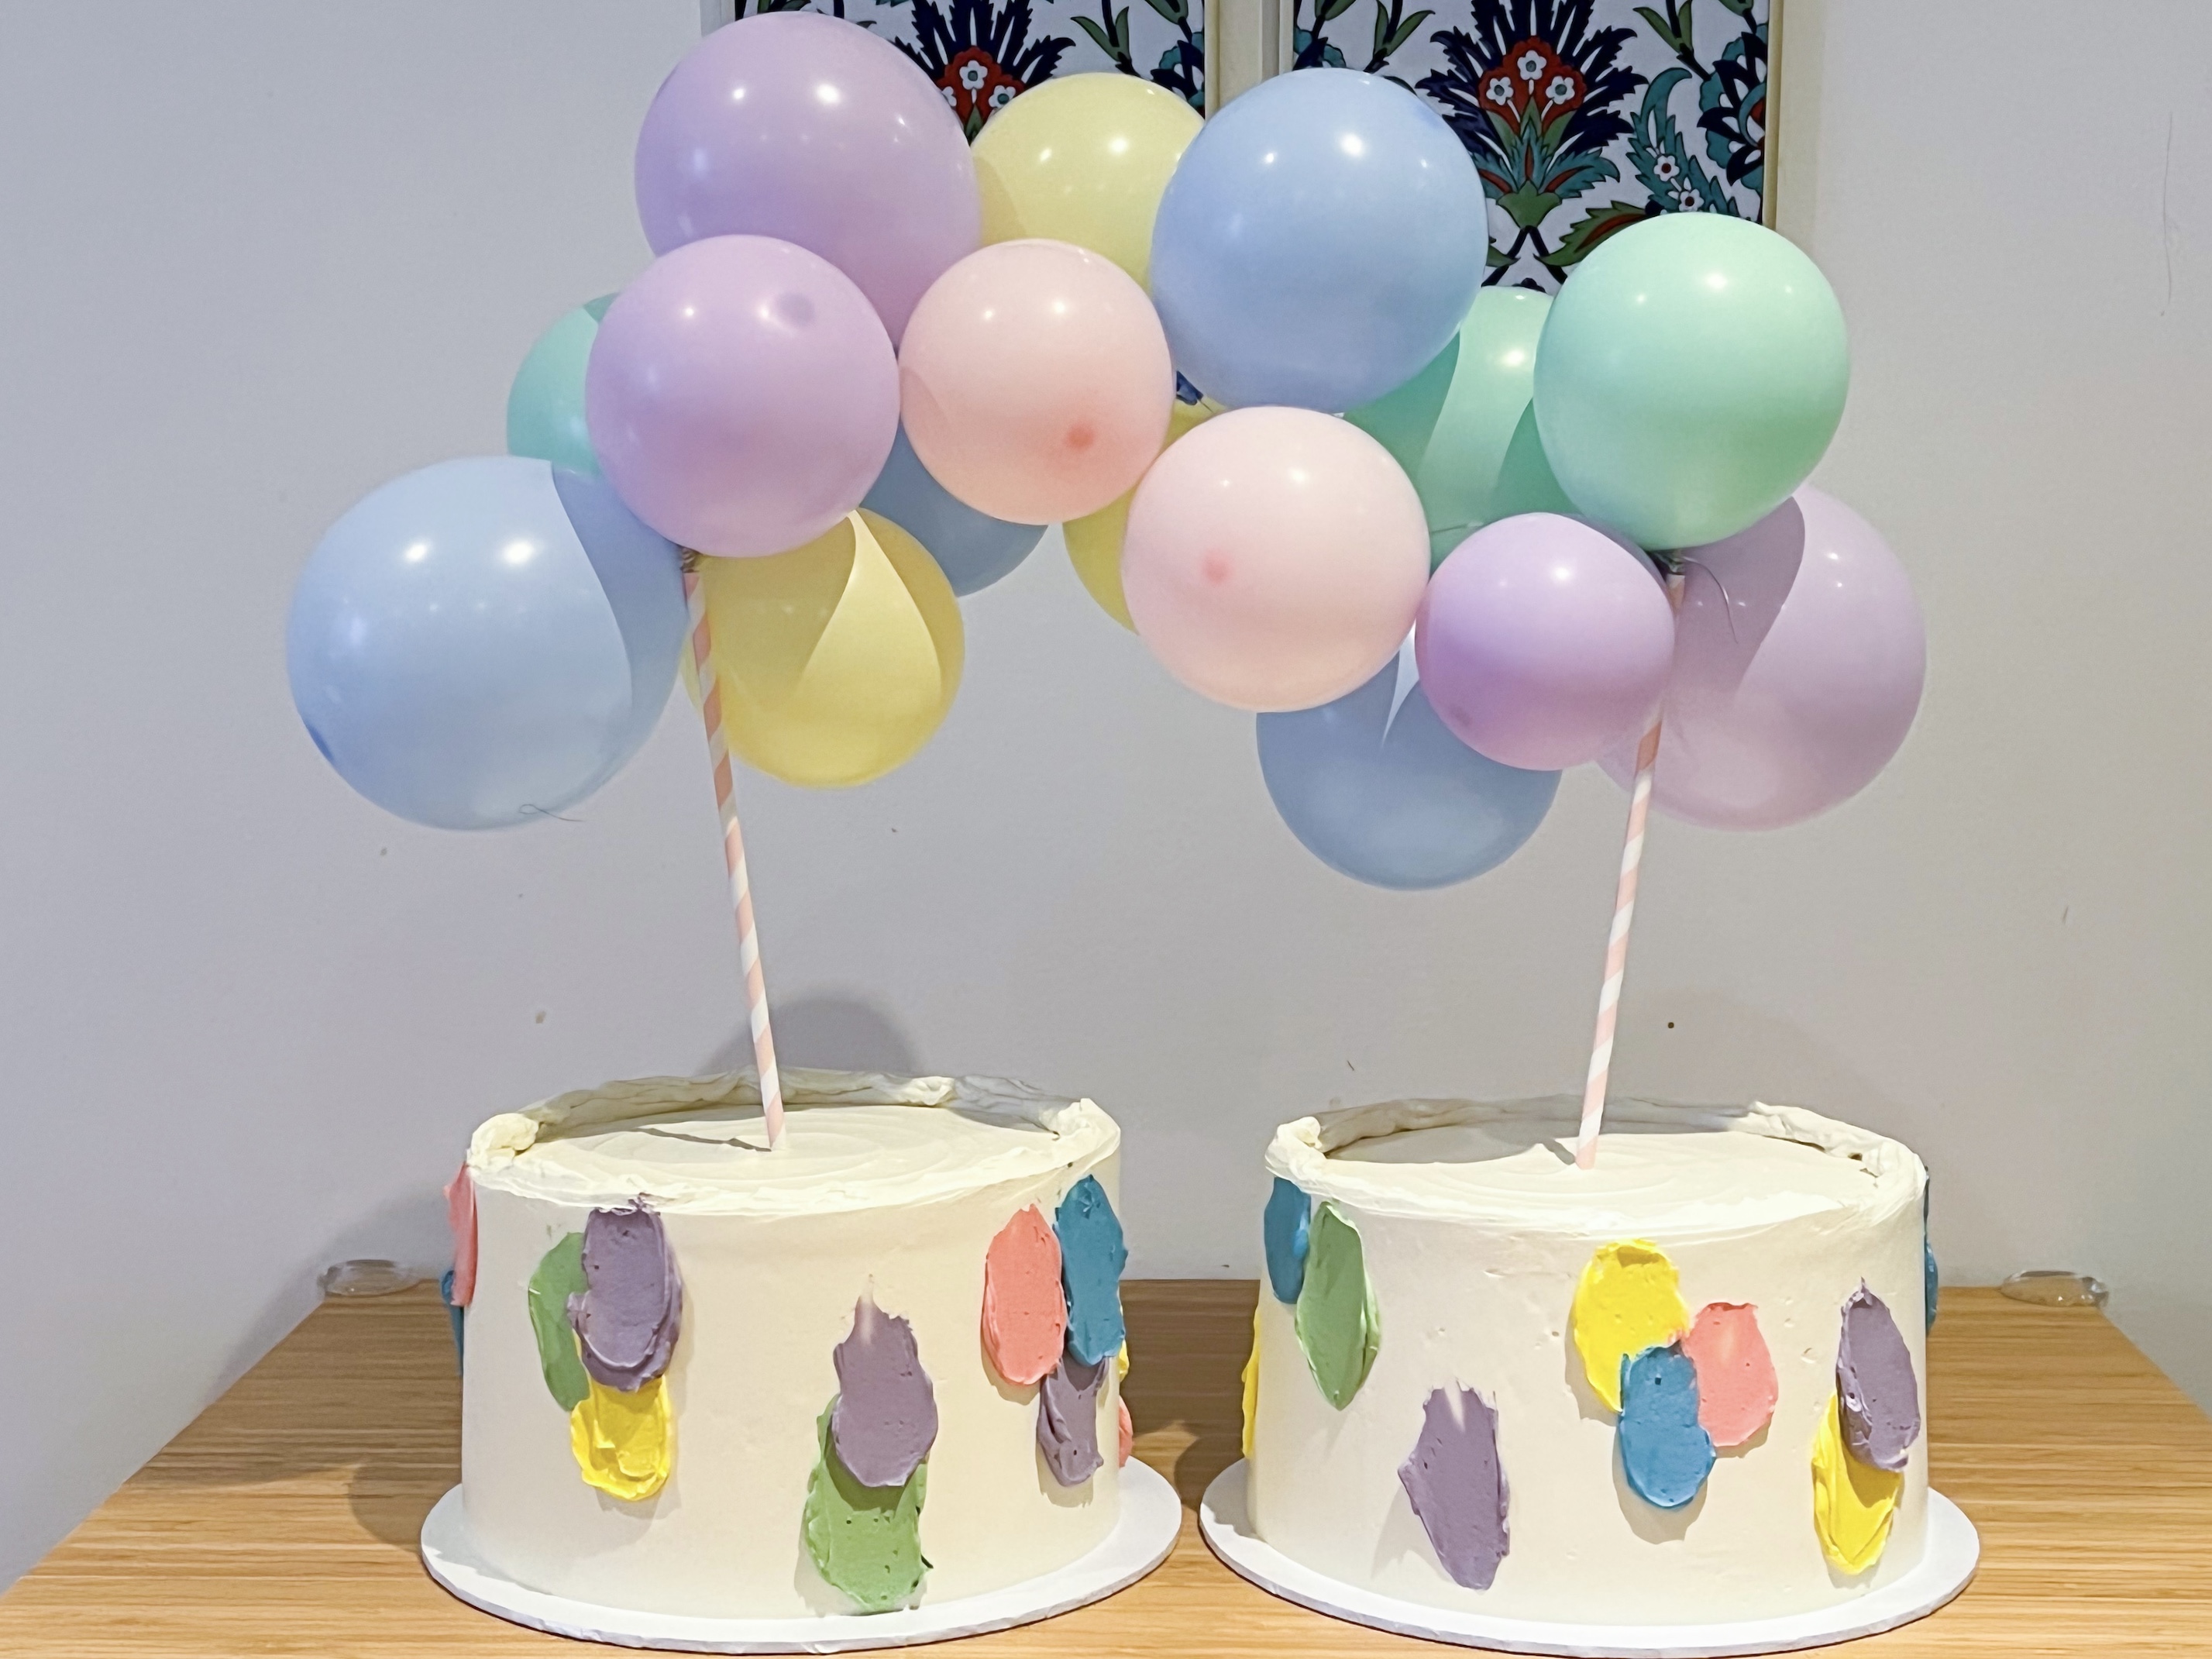 Twins turn Two – A Balloon themed birthday party